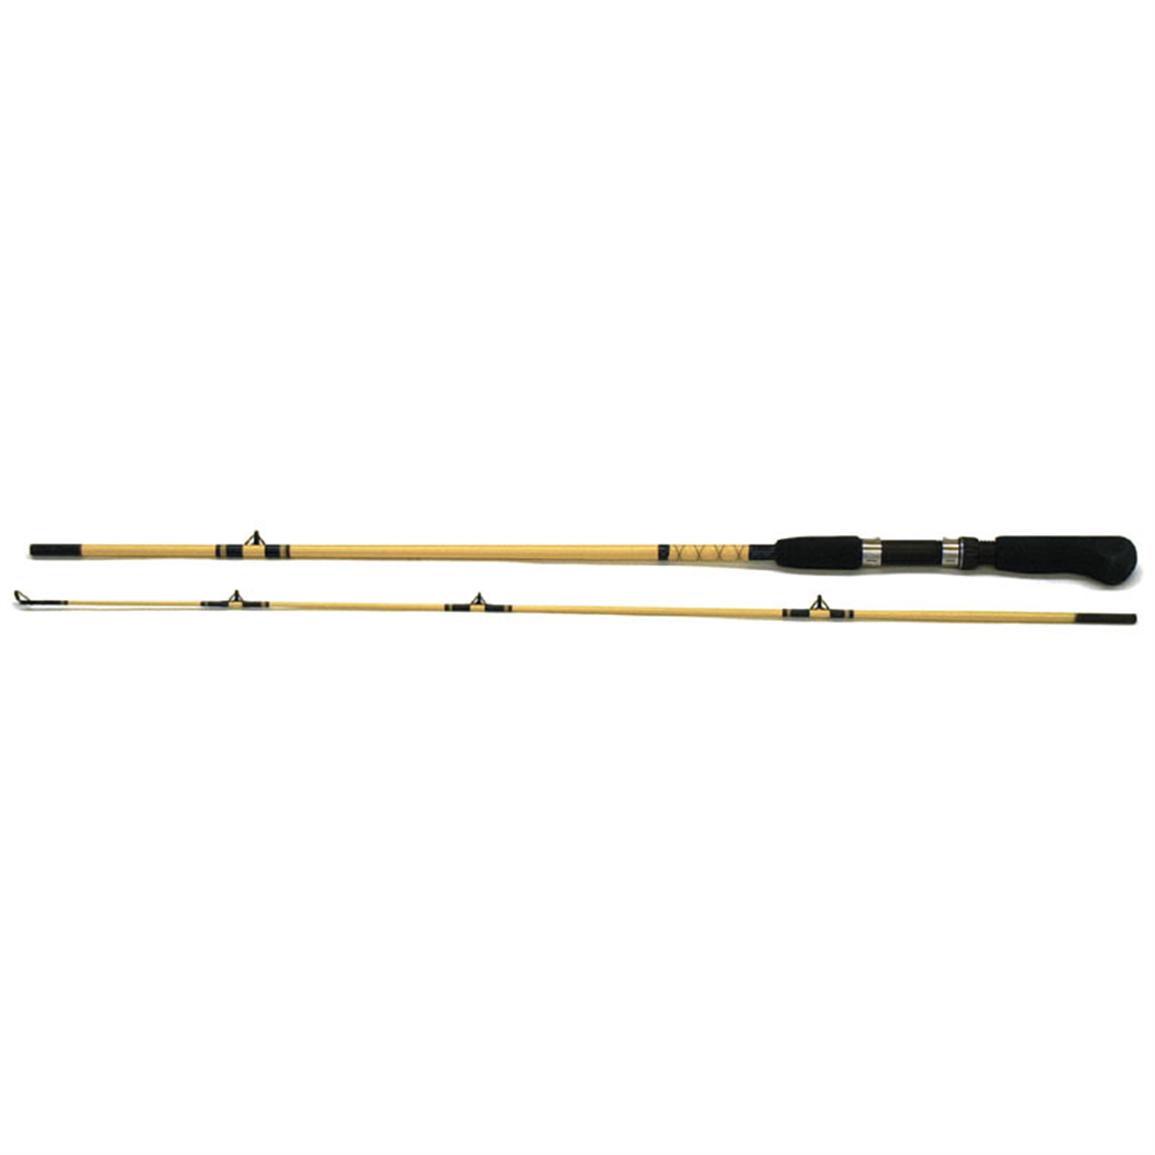 Post your downrigger rod/reel combos (please?)